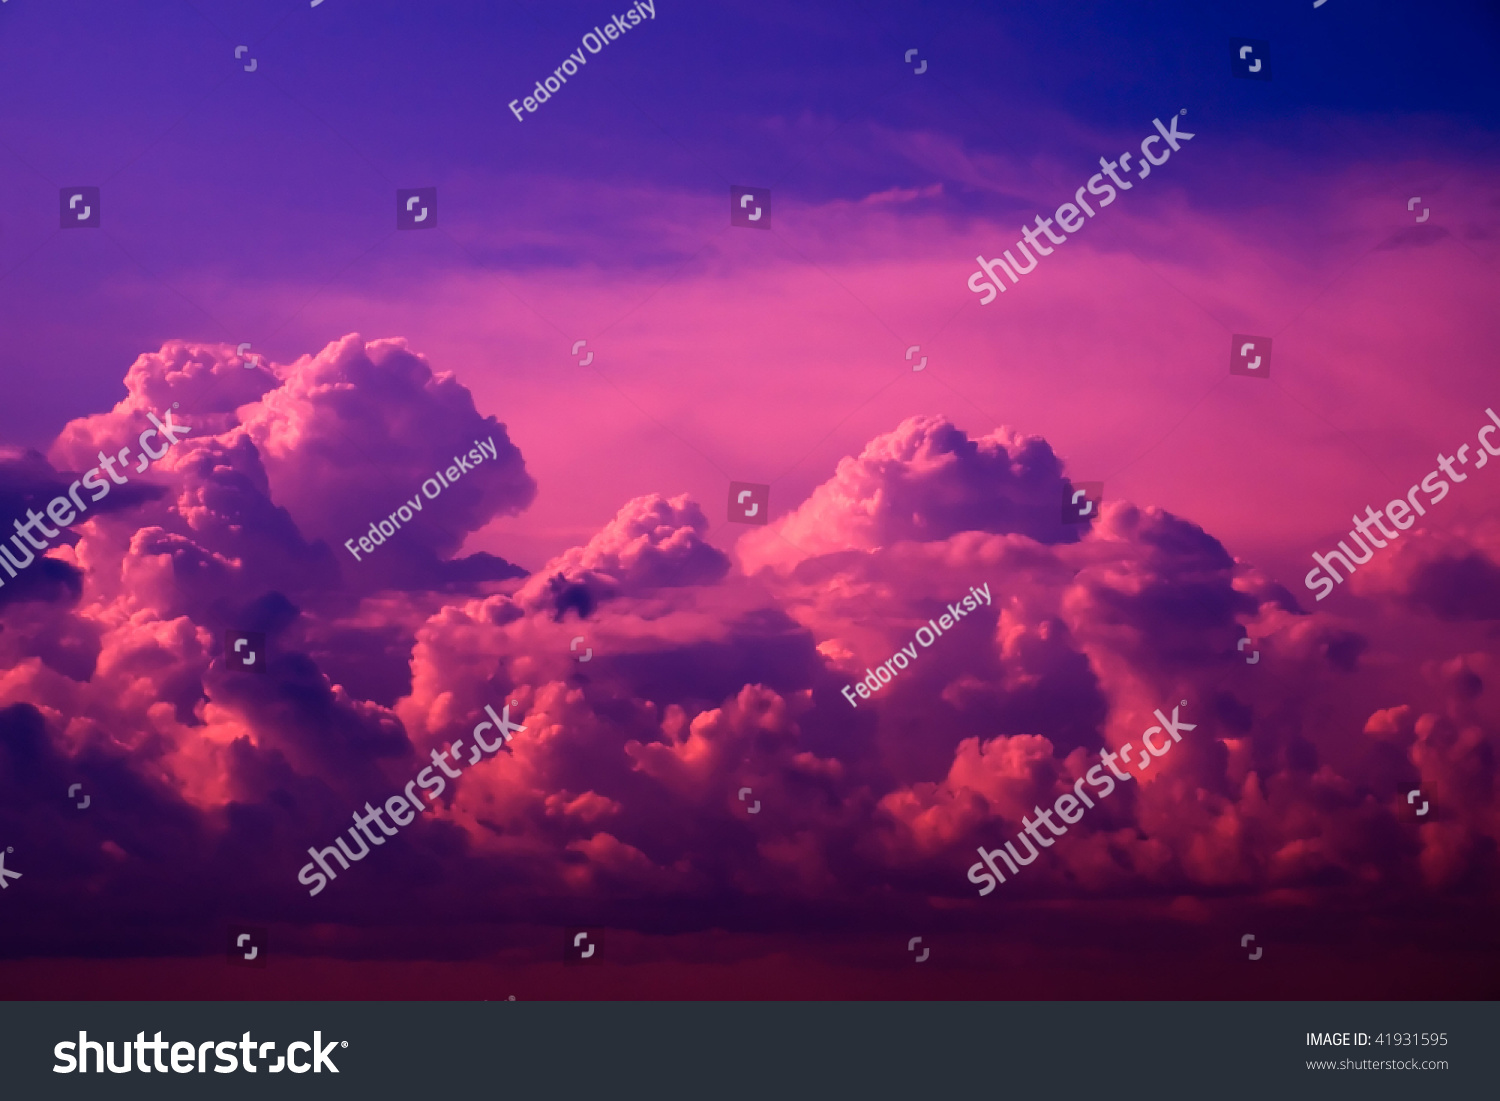 Image result for images of pink clouds in the dark